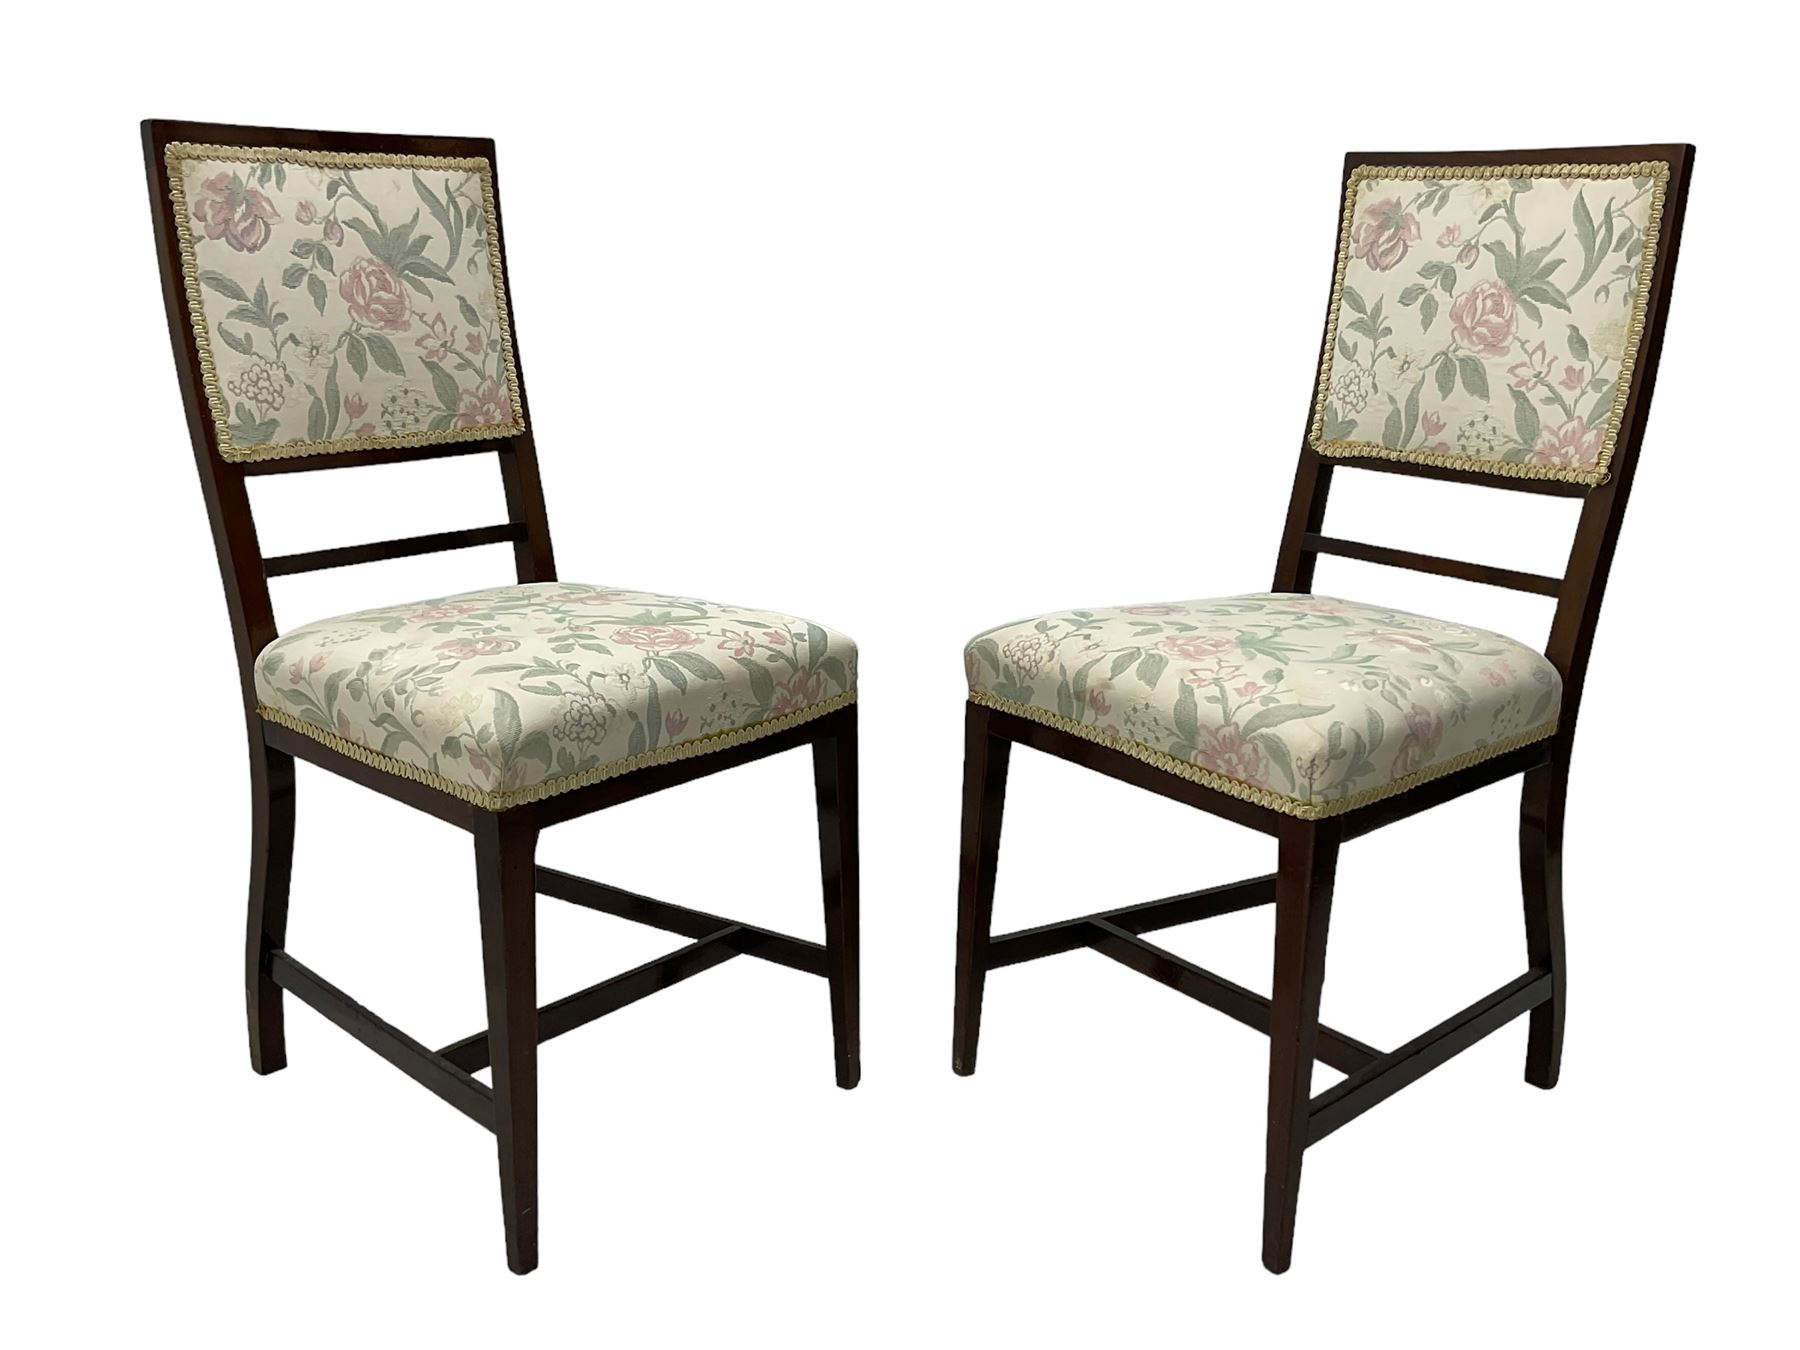 Pair of mahogany framed bedroom chairs upholstered in floral pattern fabric (W45cm); rectangular foo